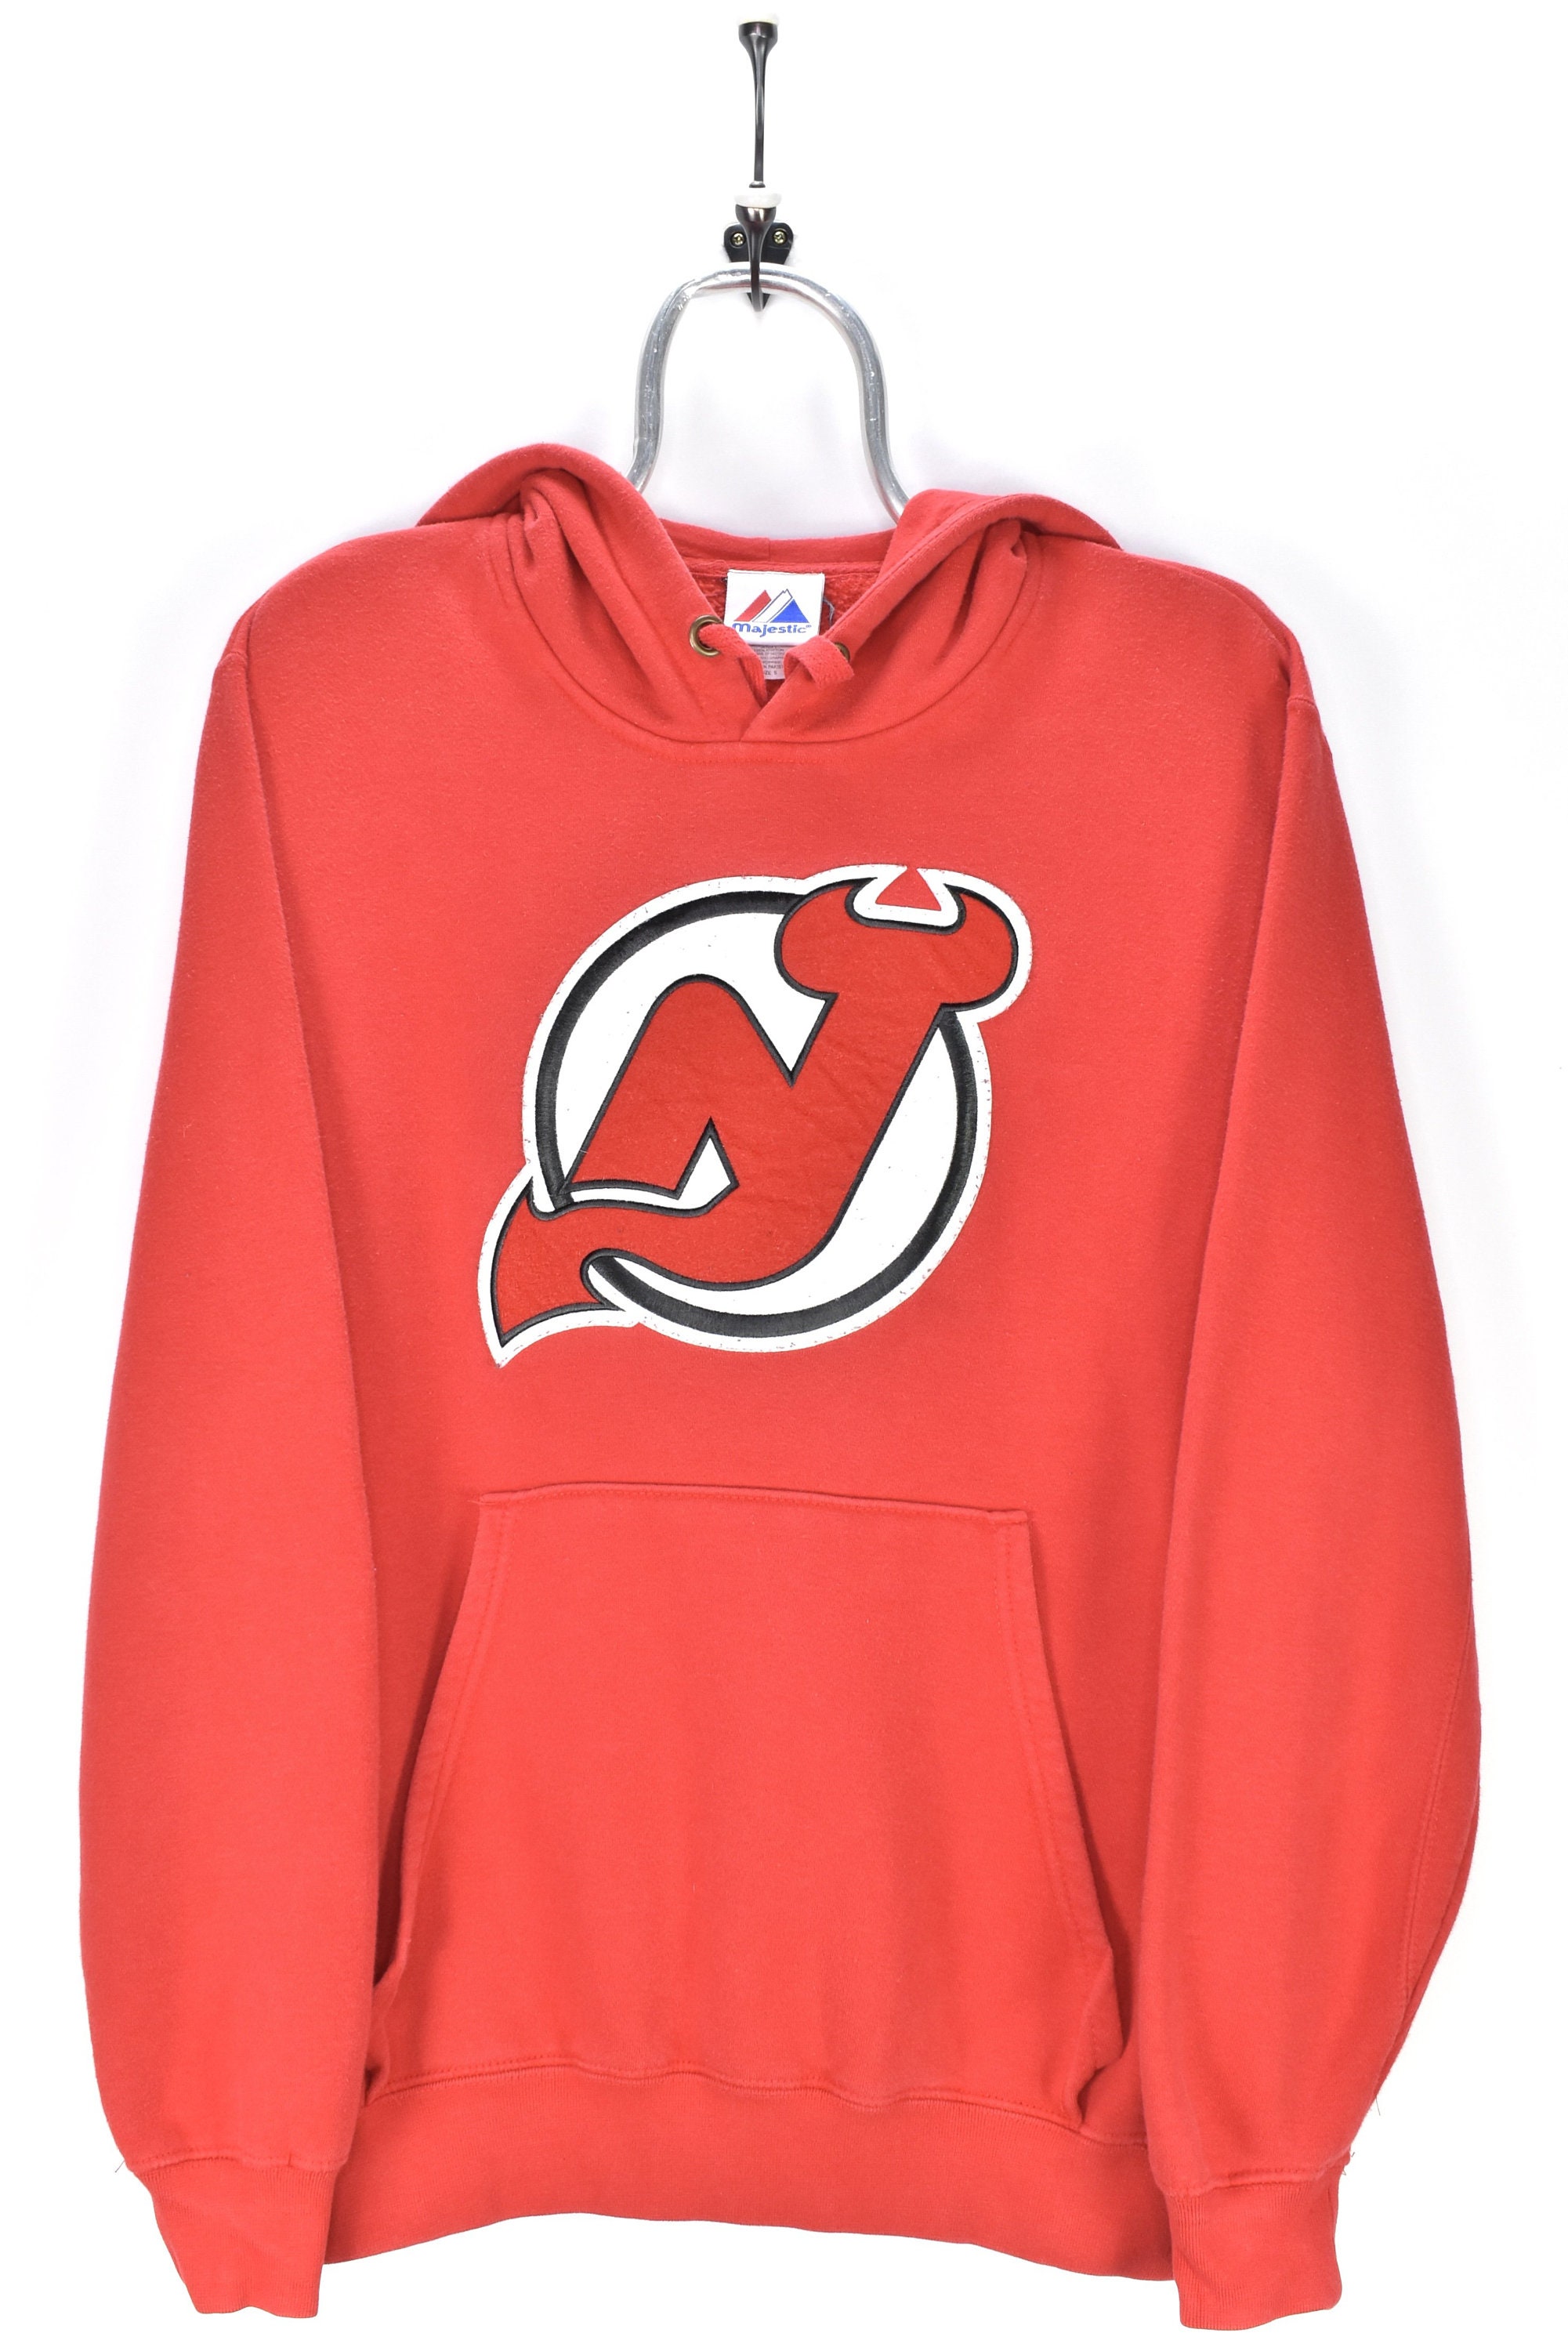 New Jersey Devils Hoodie 3D Red Black Logo Jersey Devils Gift -  Personalized Gifts: Family, Sports, Occasions, Trending